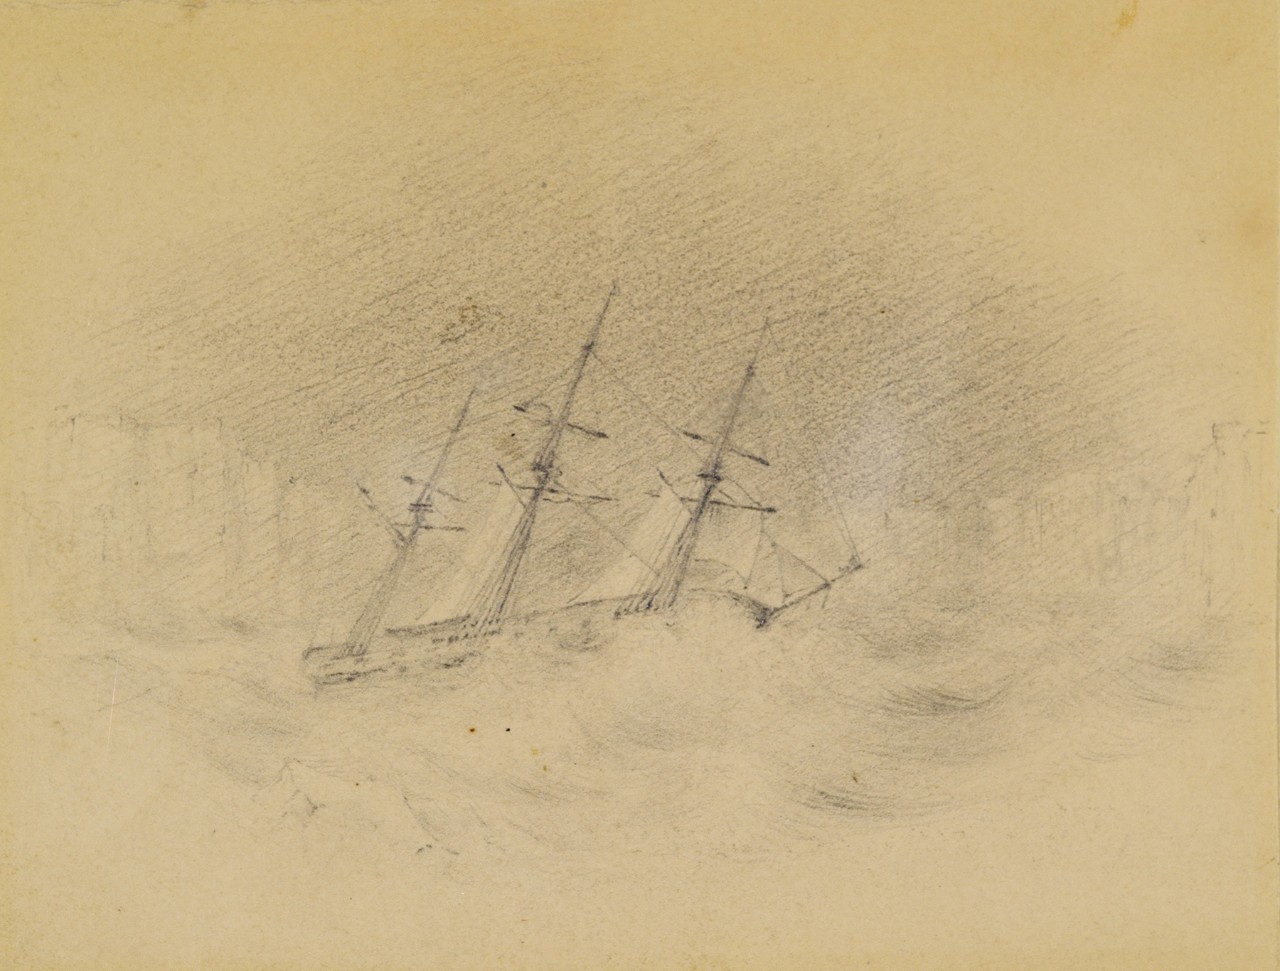 A sailing ship being pushed by the waves toward the ice shelf